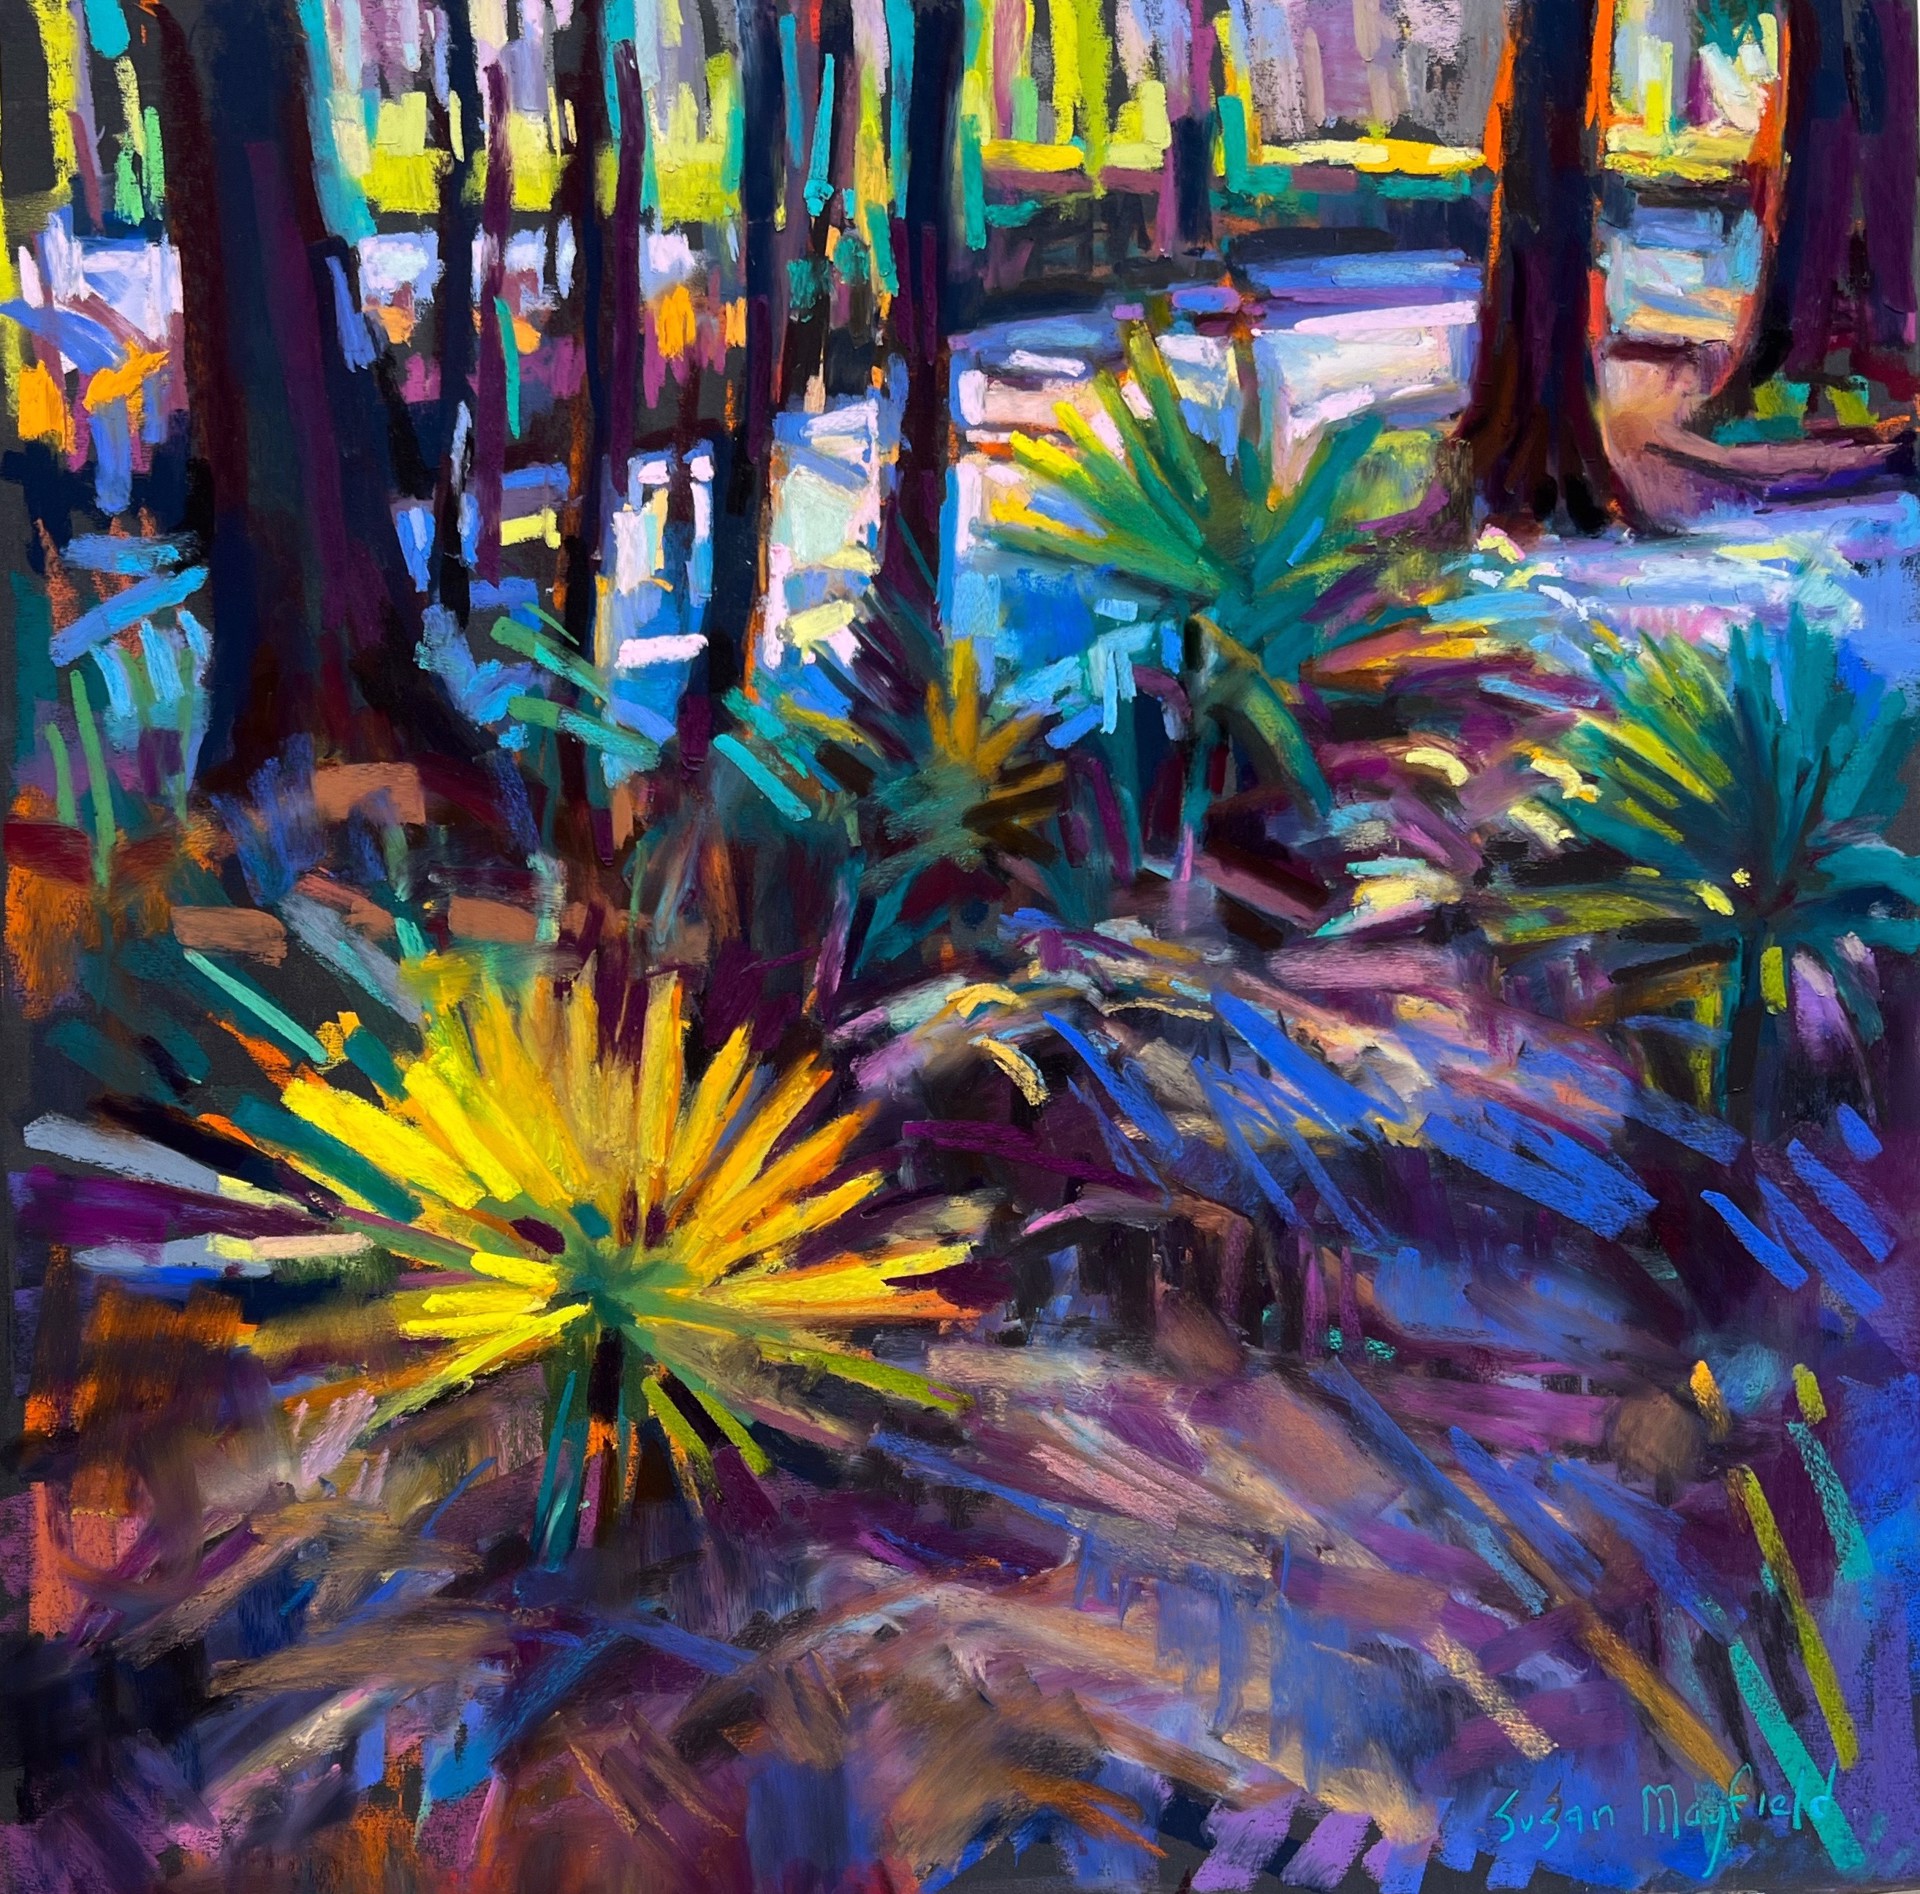 Palmettos & Palms (Deep in the Swamp) by Susan Mayfield